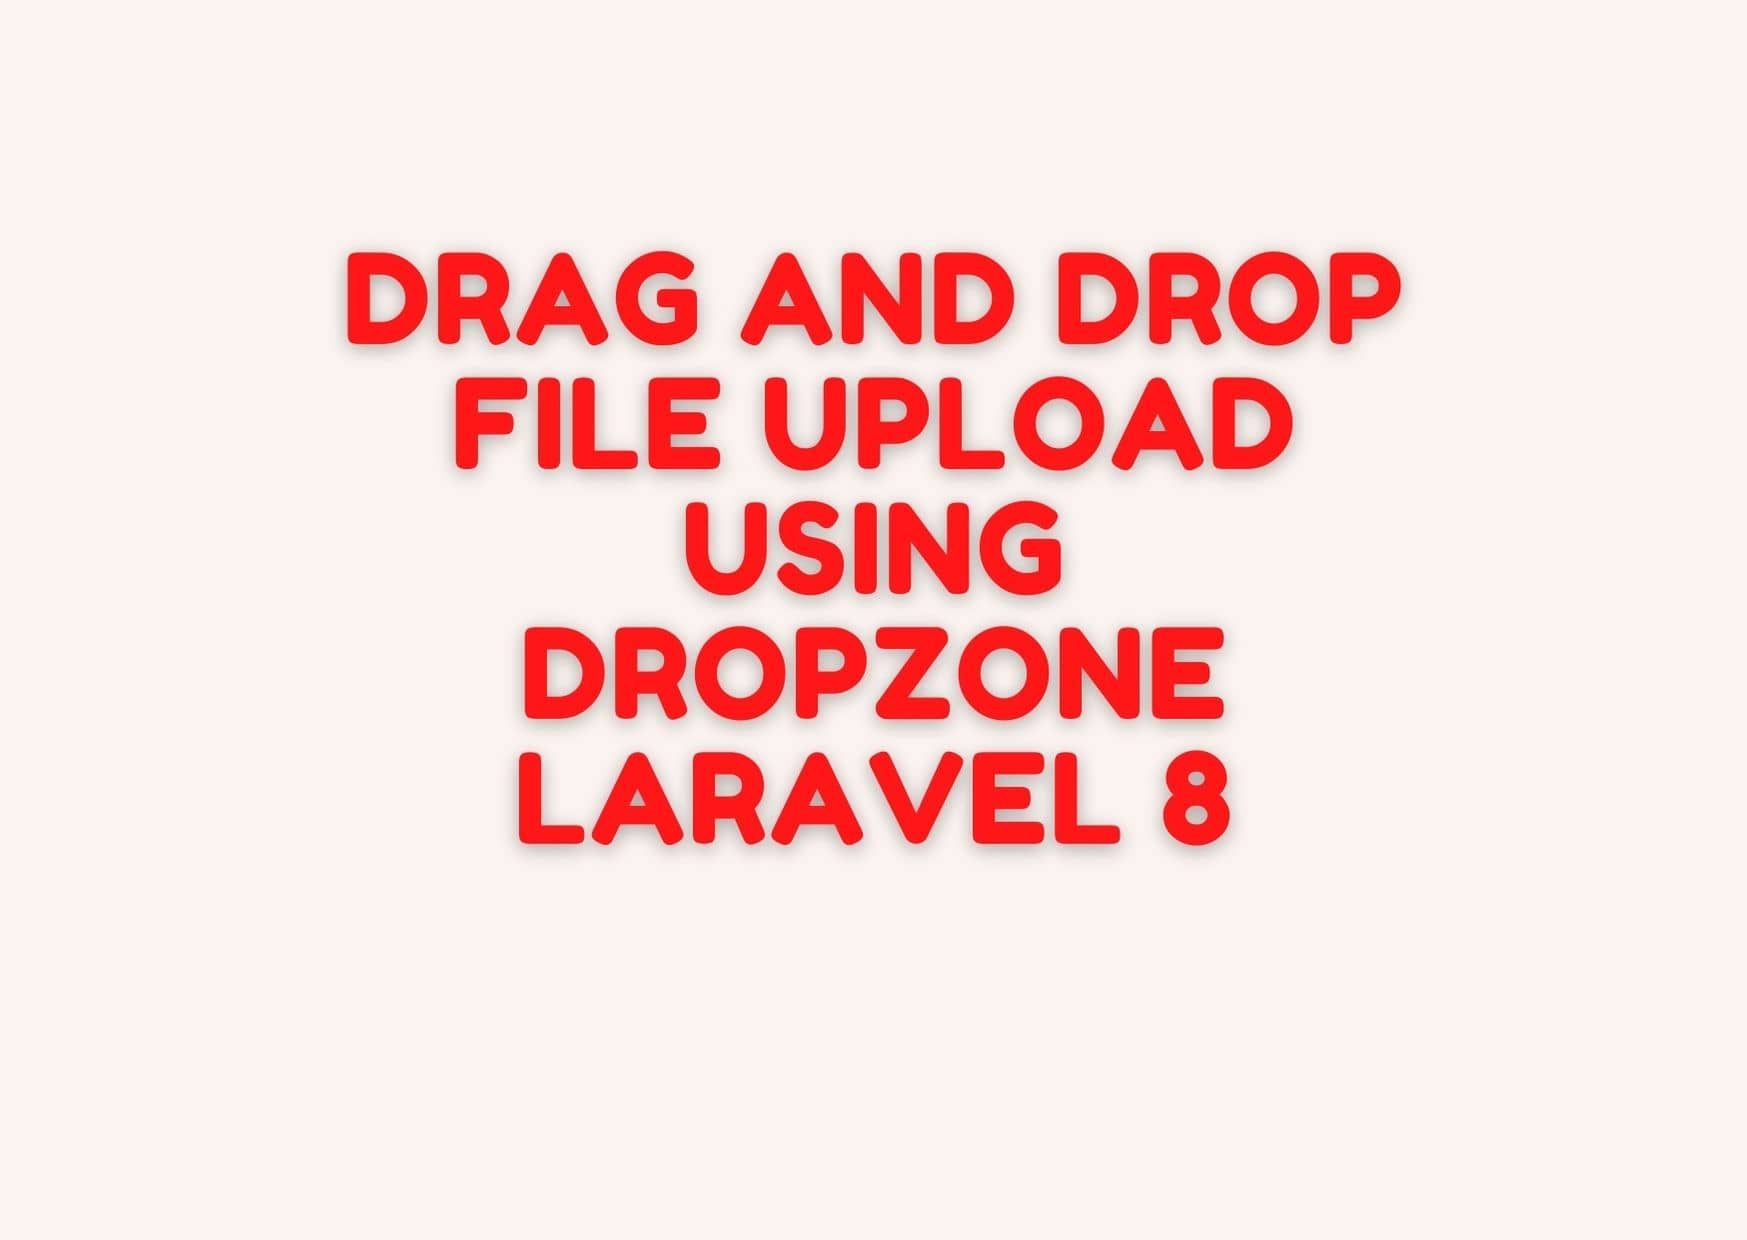 How to Drag and Drop File Upload using DropzoneJS - Laravel 8 Tutorial